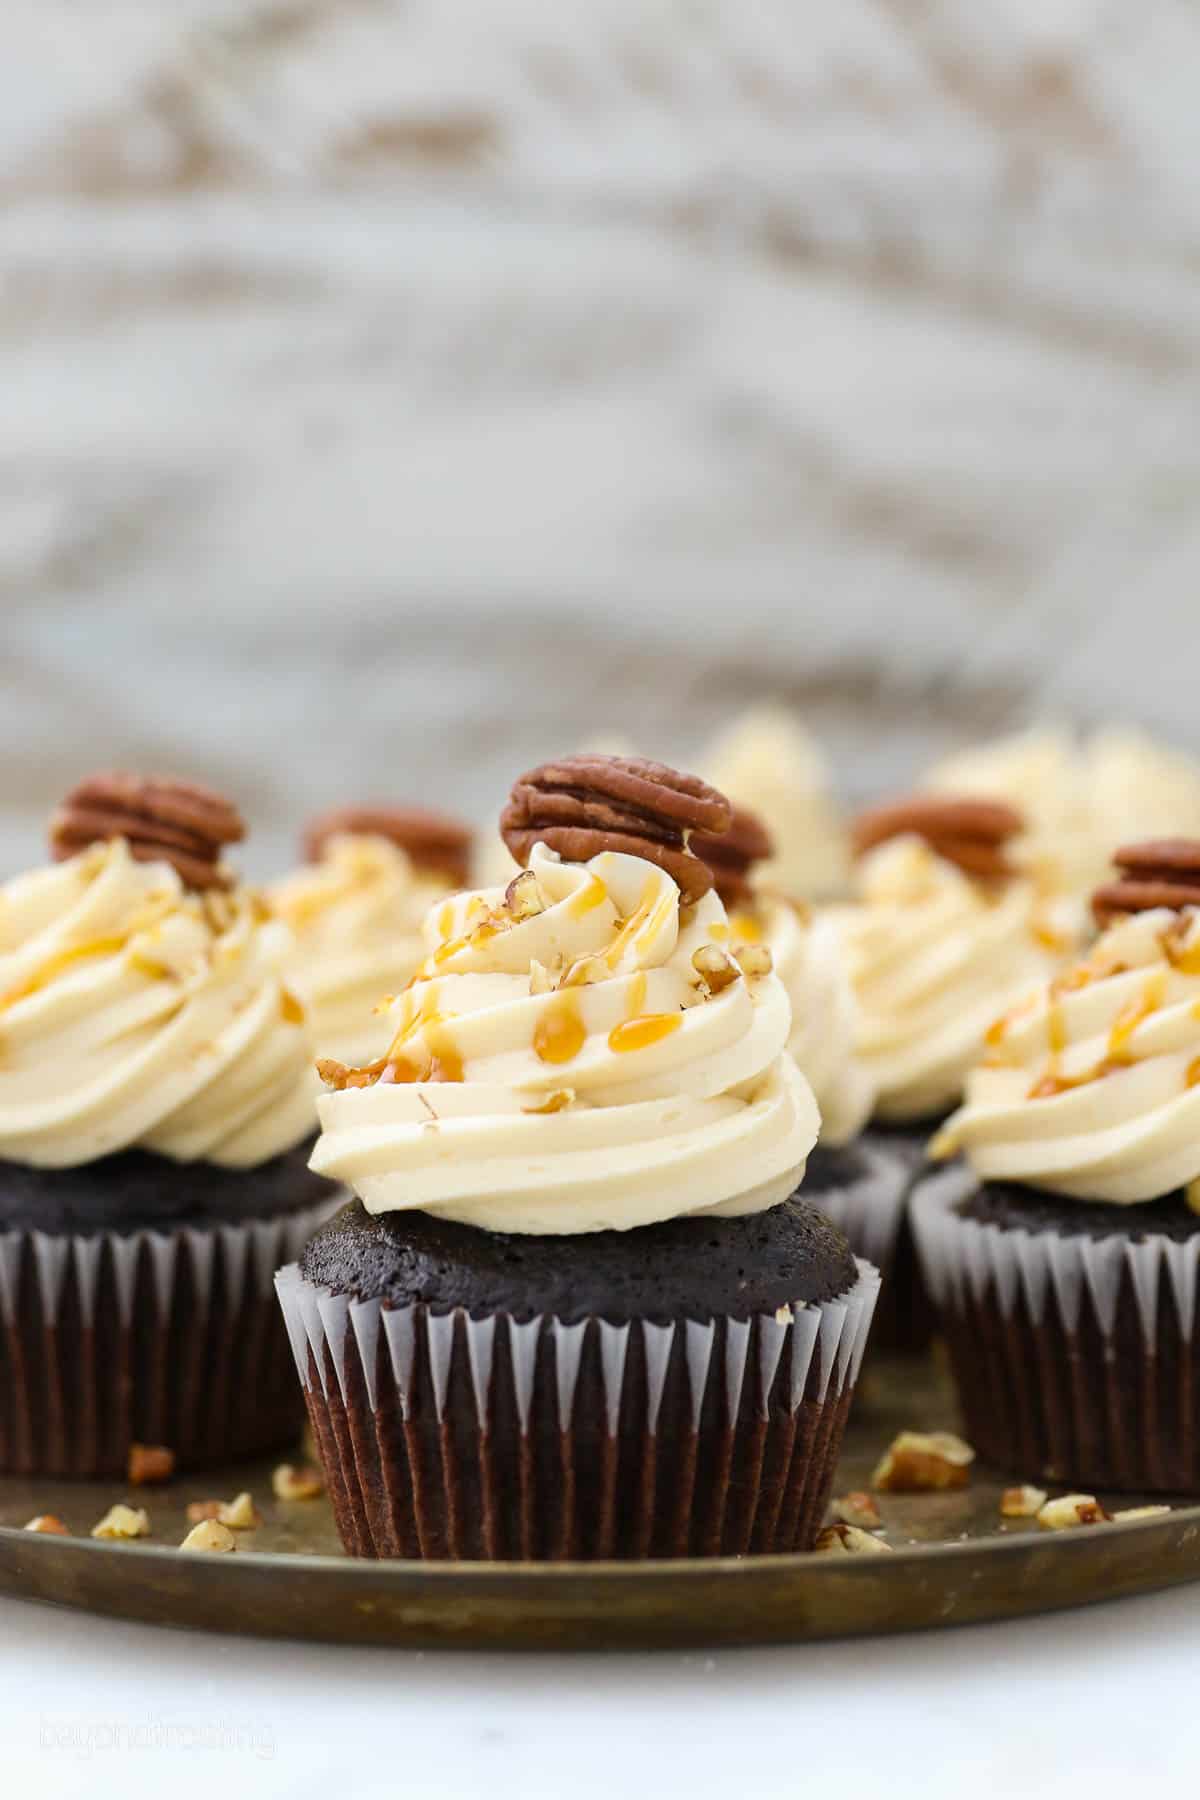 side view of a platter filled with chocolate cupcakes with caramel buttercream.